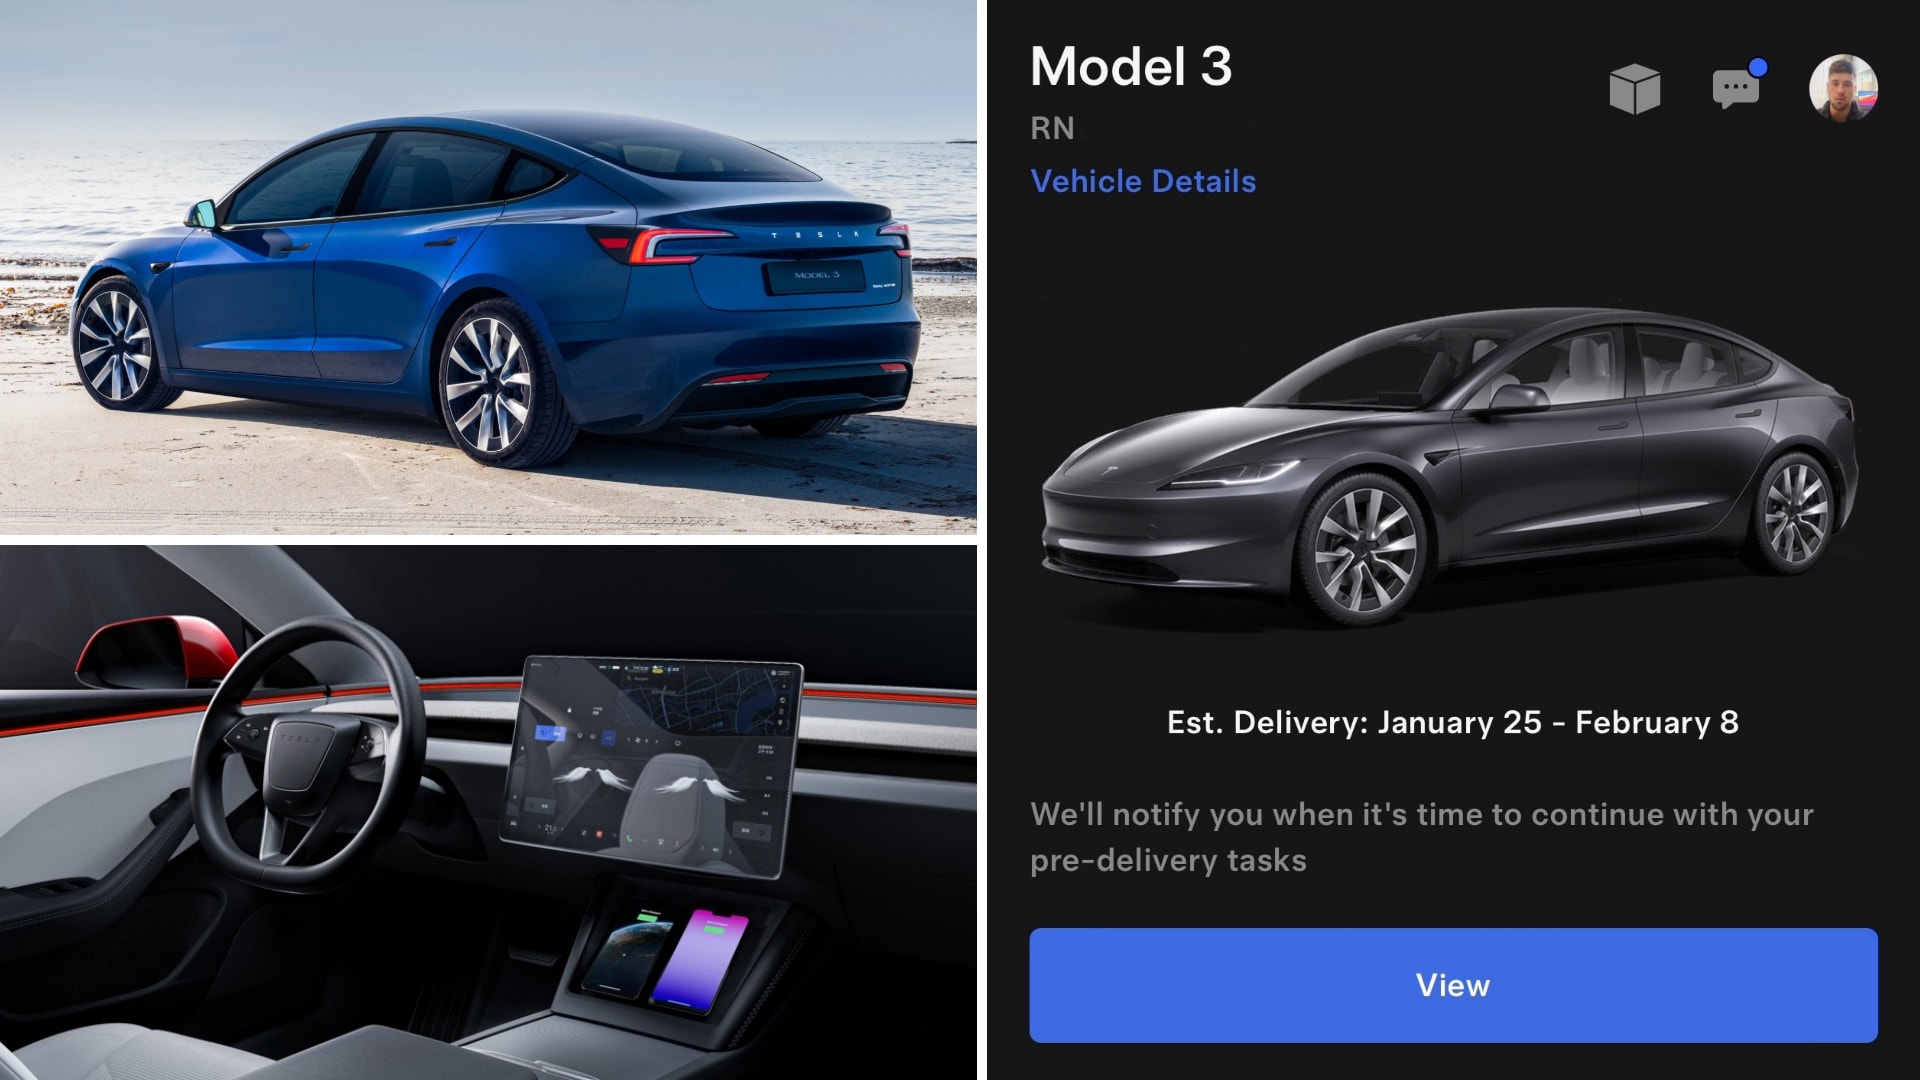 Tesla Model 3 Highland Gets First Reviews But U.S. Price, Orders TBD